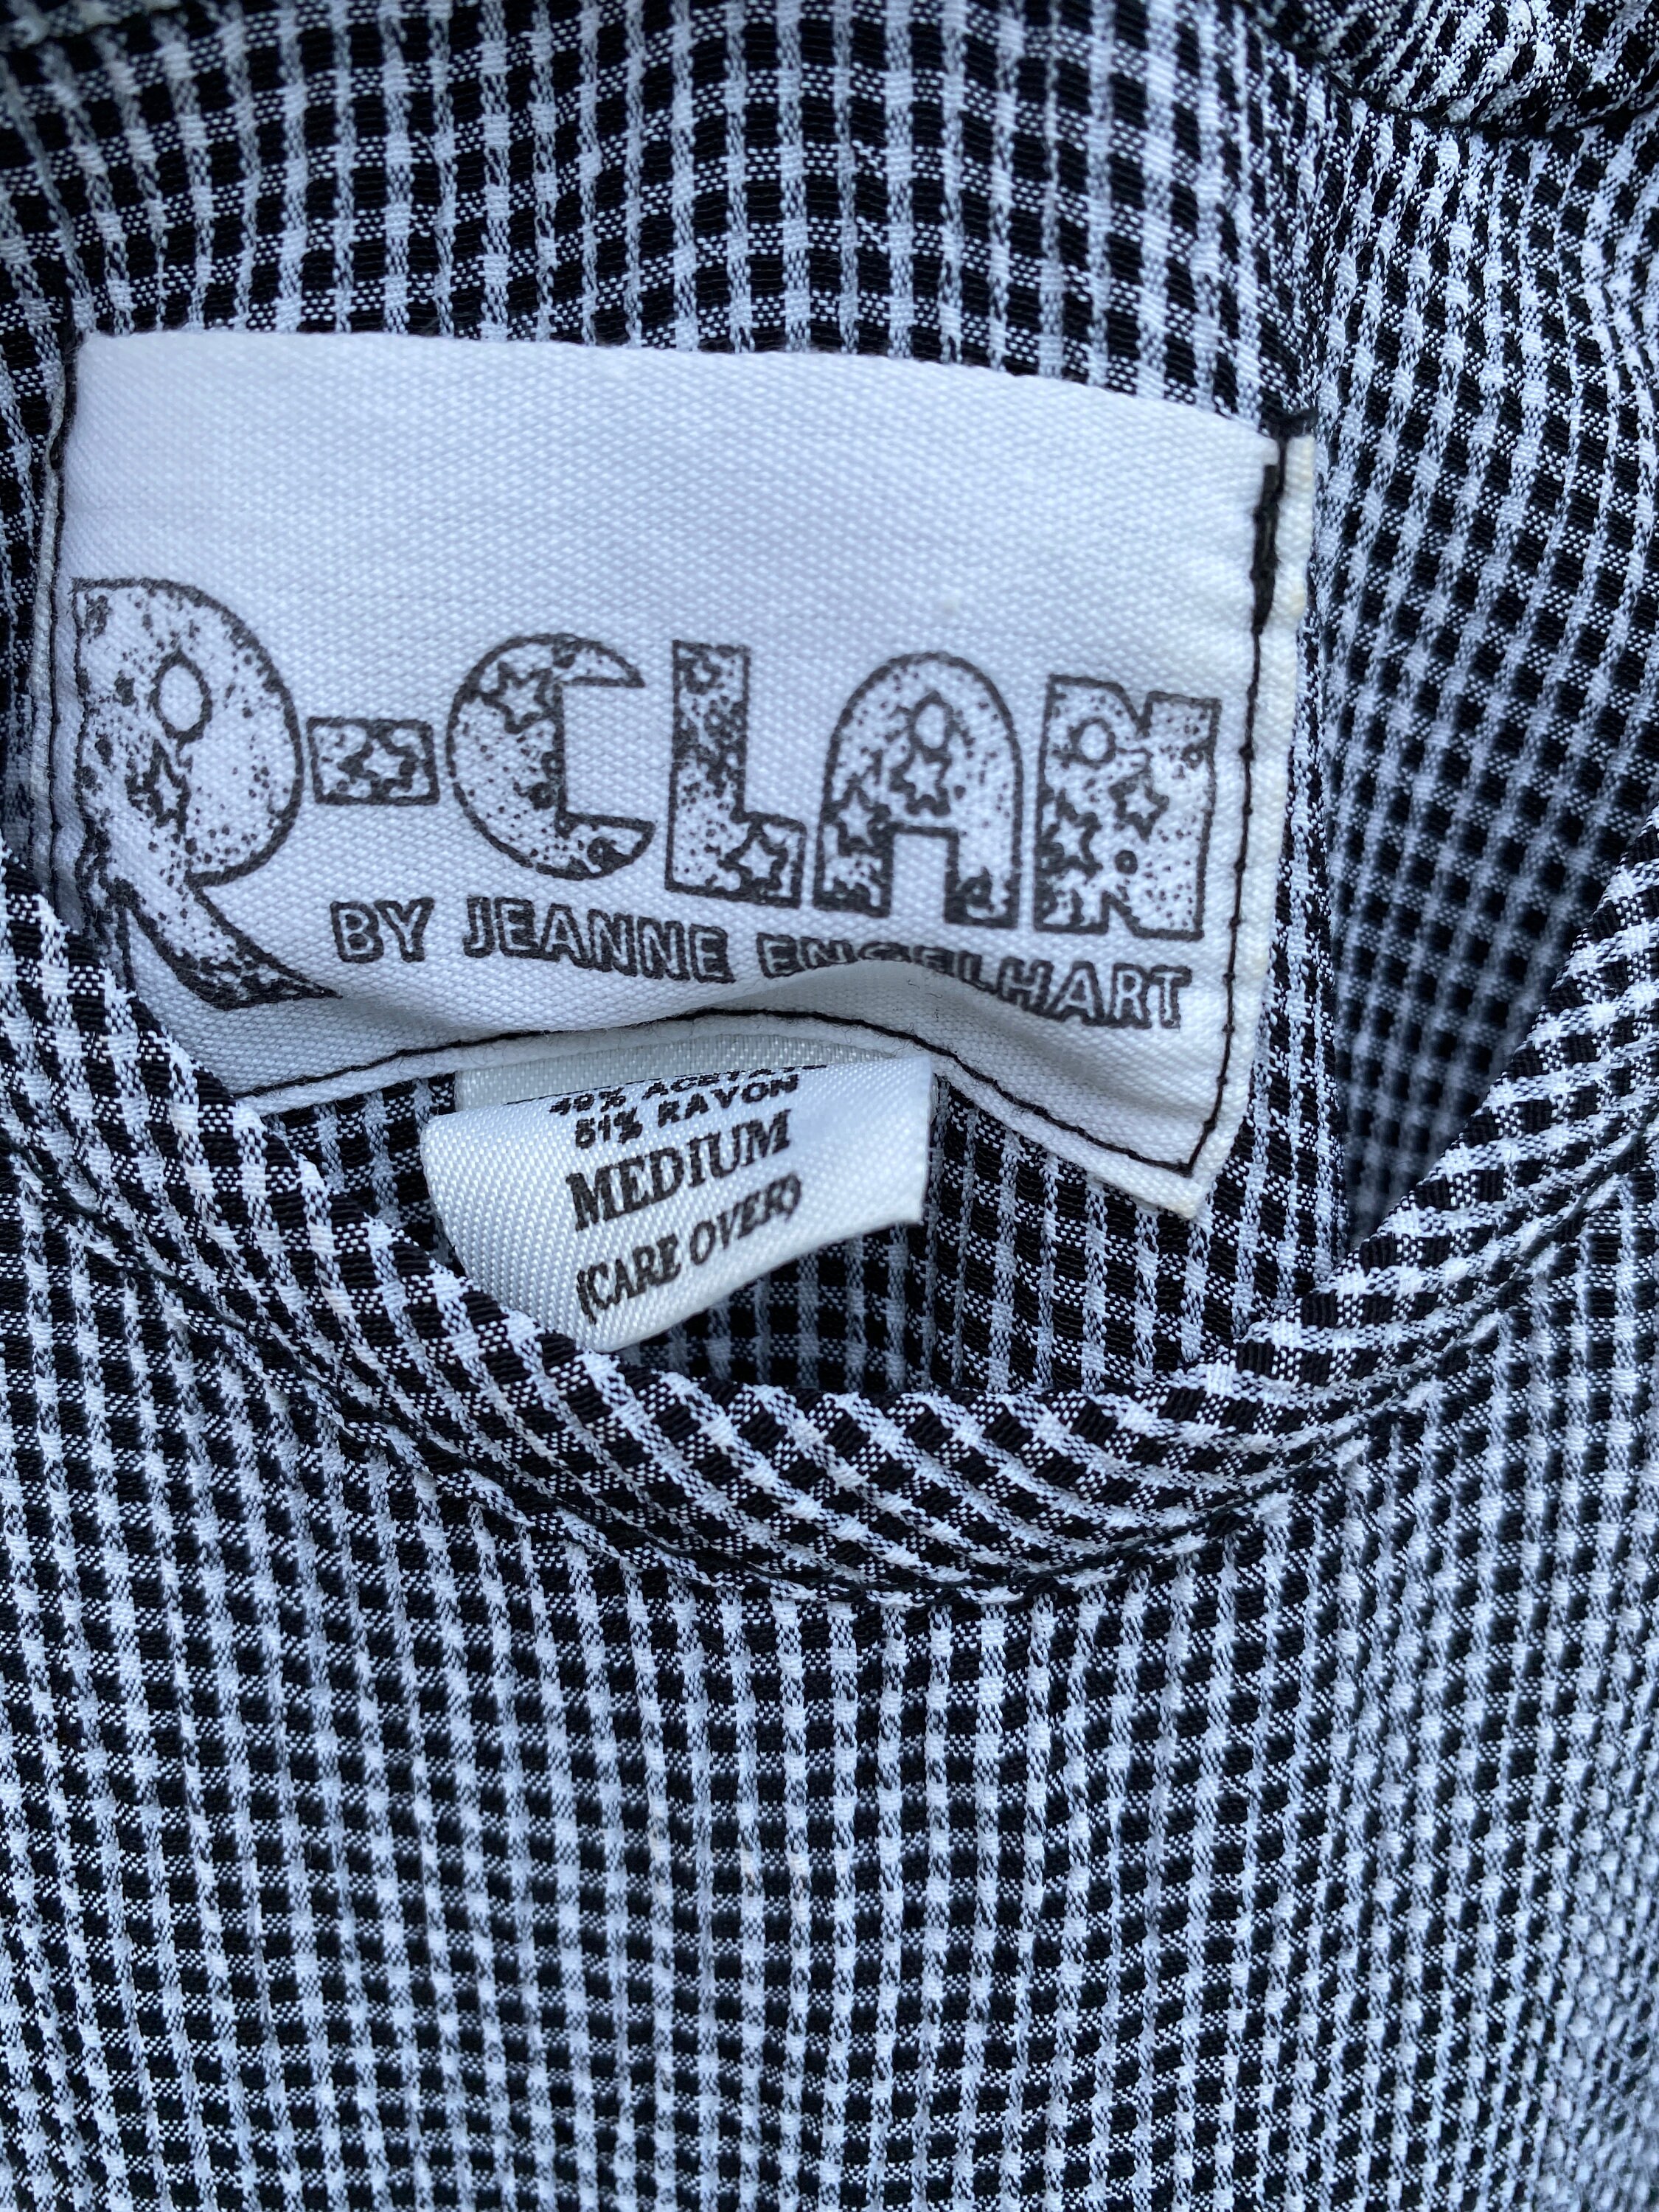 R-CLAN by Jeanne Engelhart Slipster -M- Black/White Check Acetate/Rayon